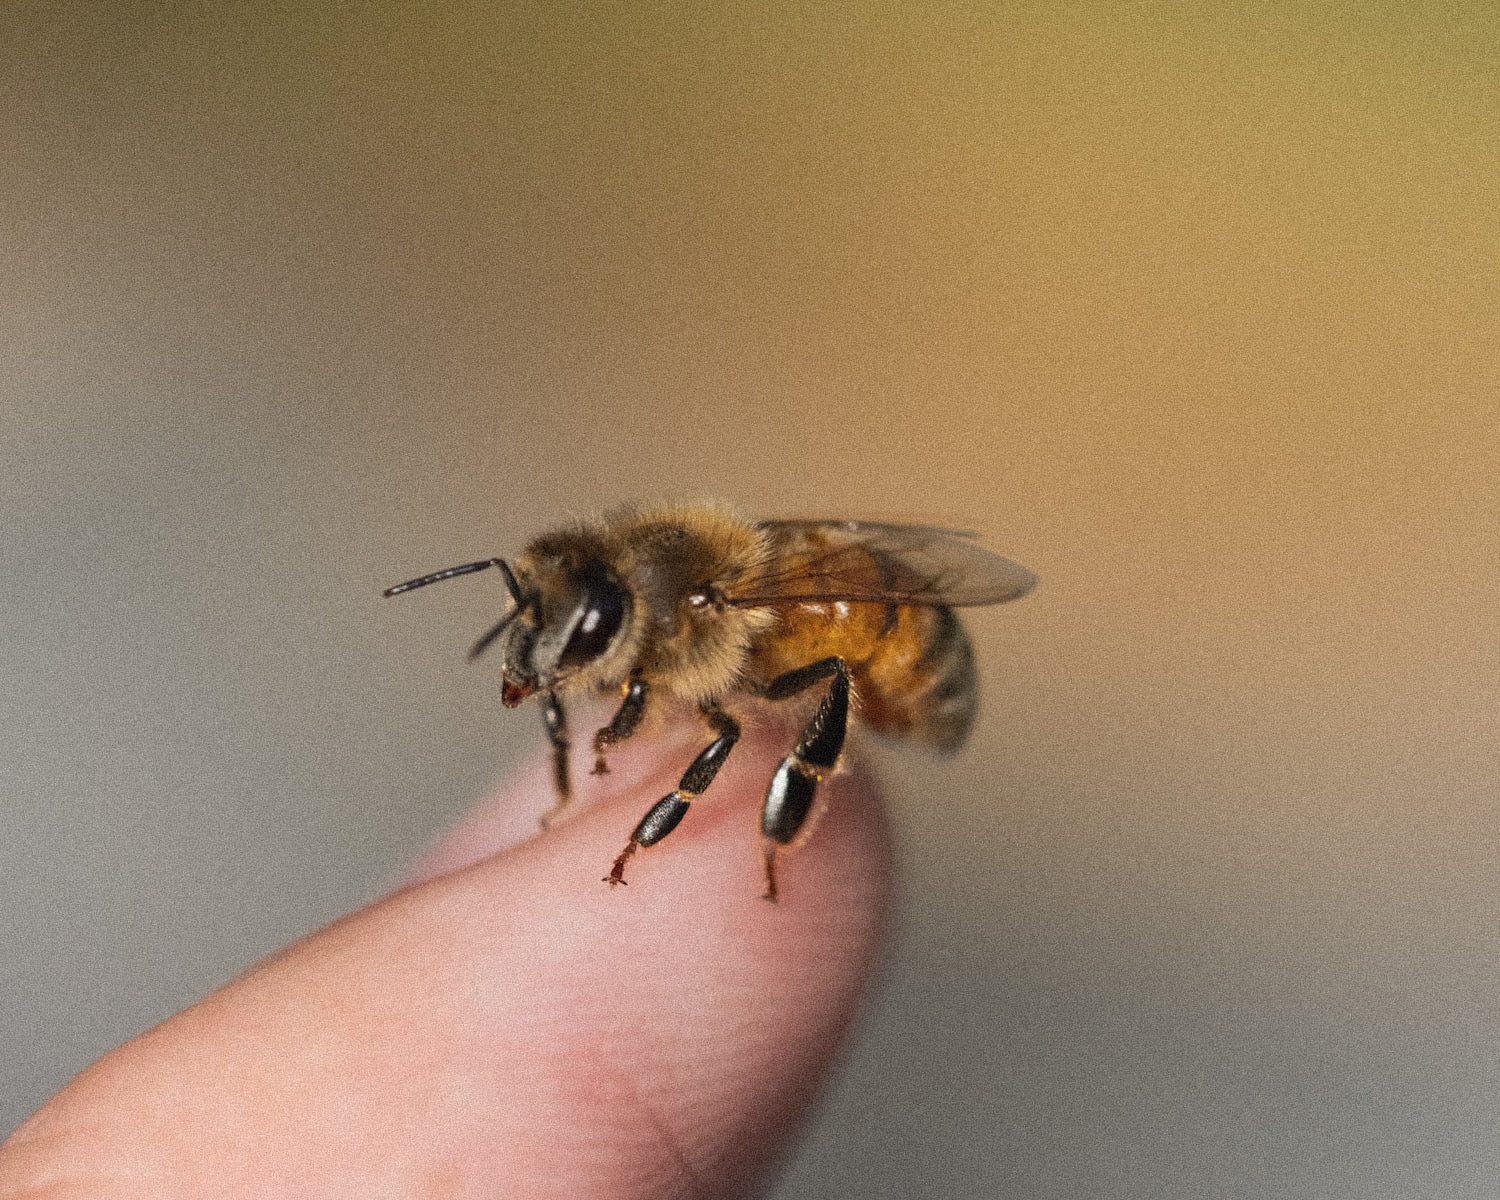 Bee resting on finger with grey and yellow background.